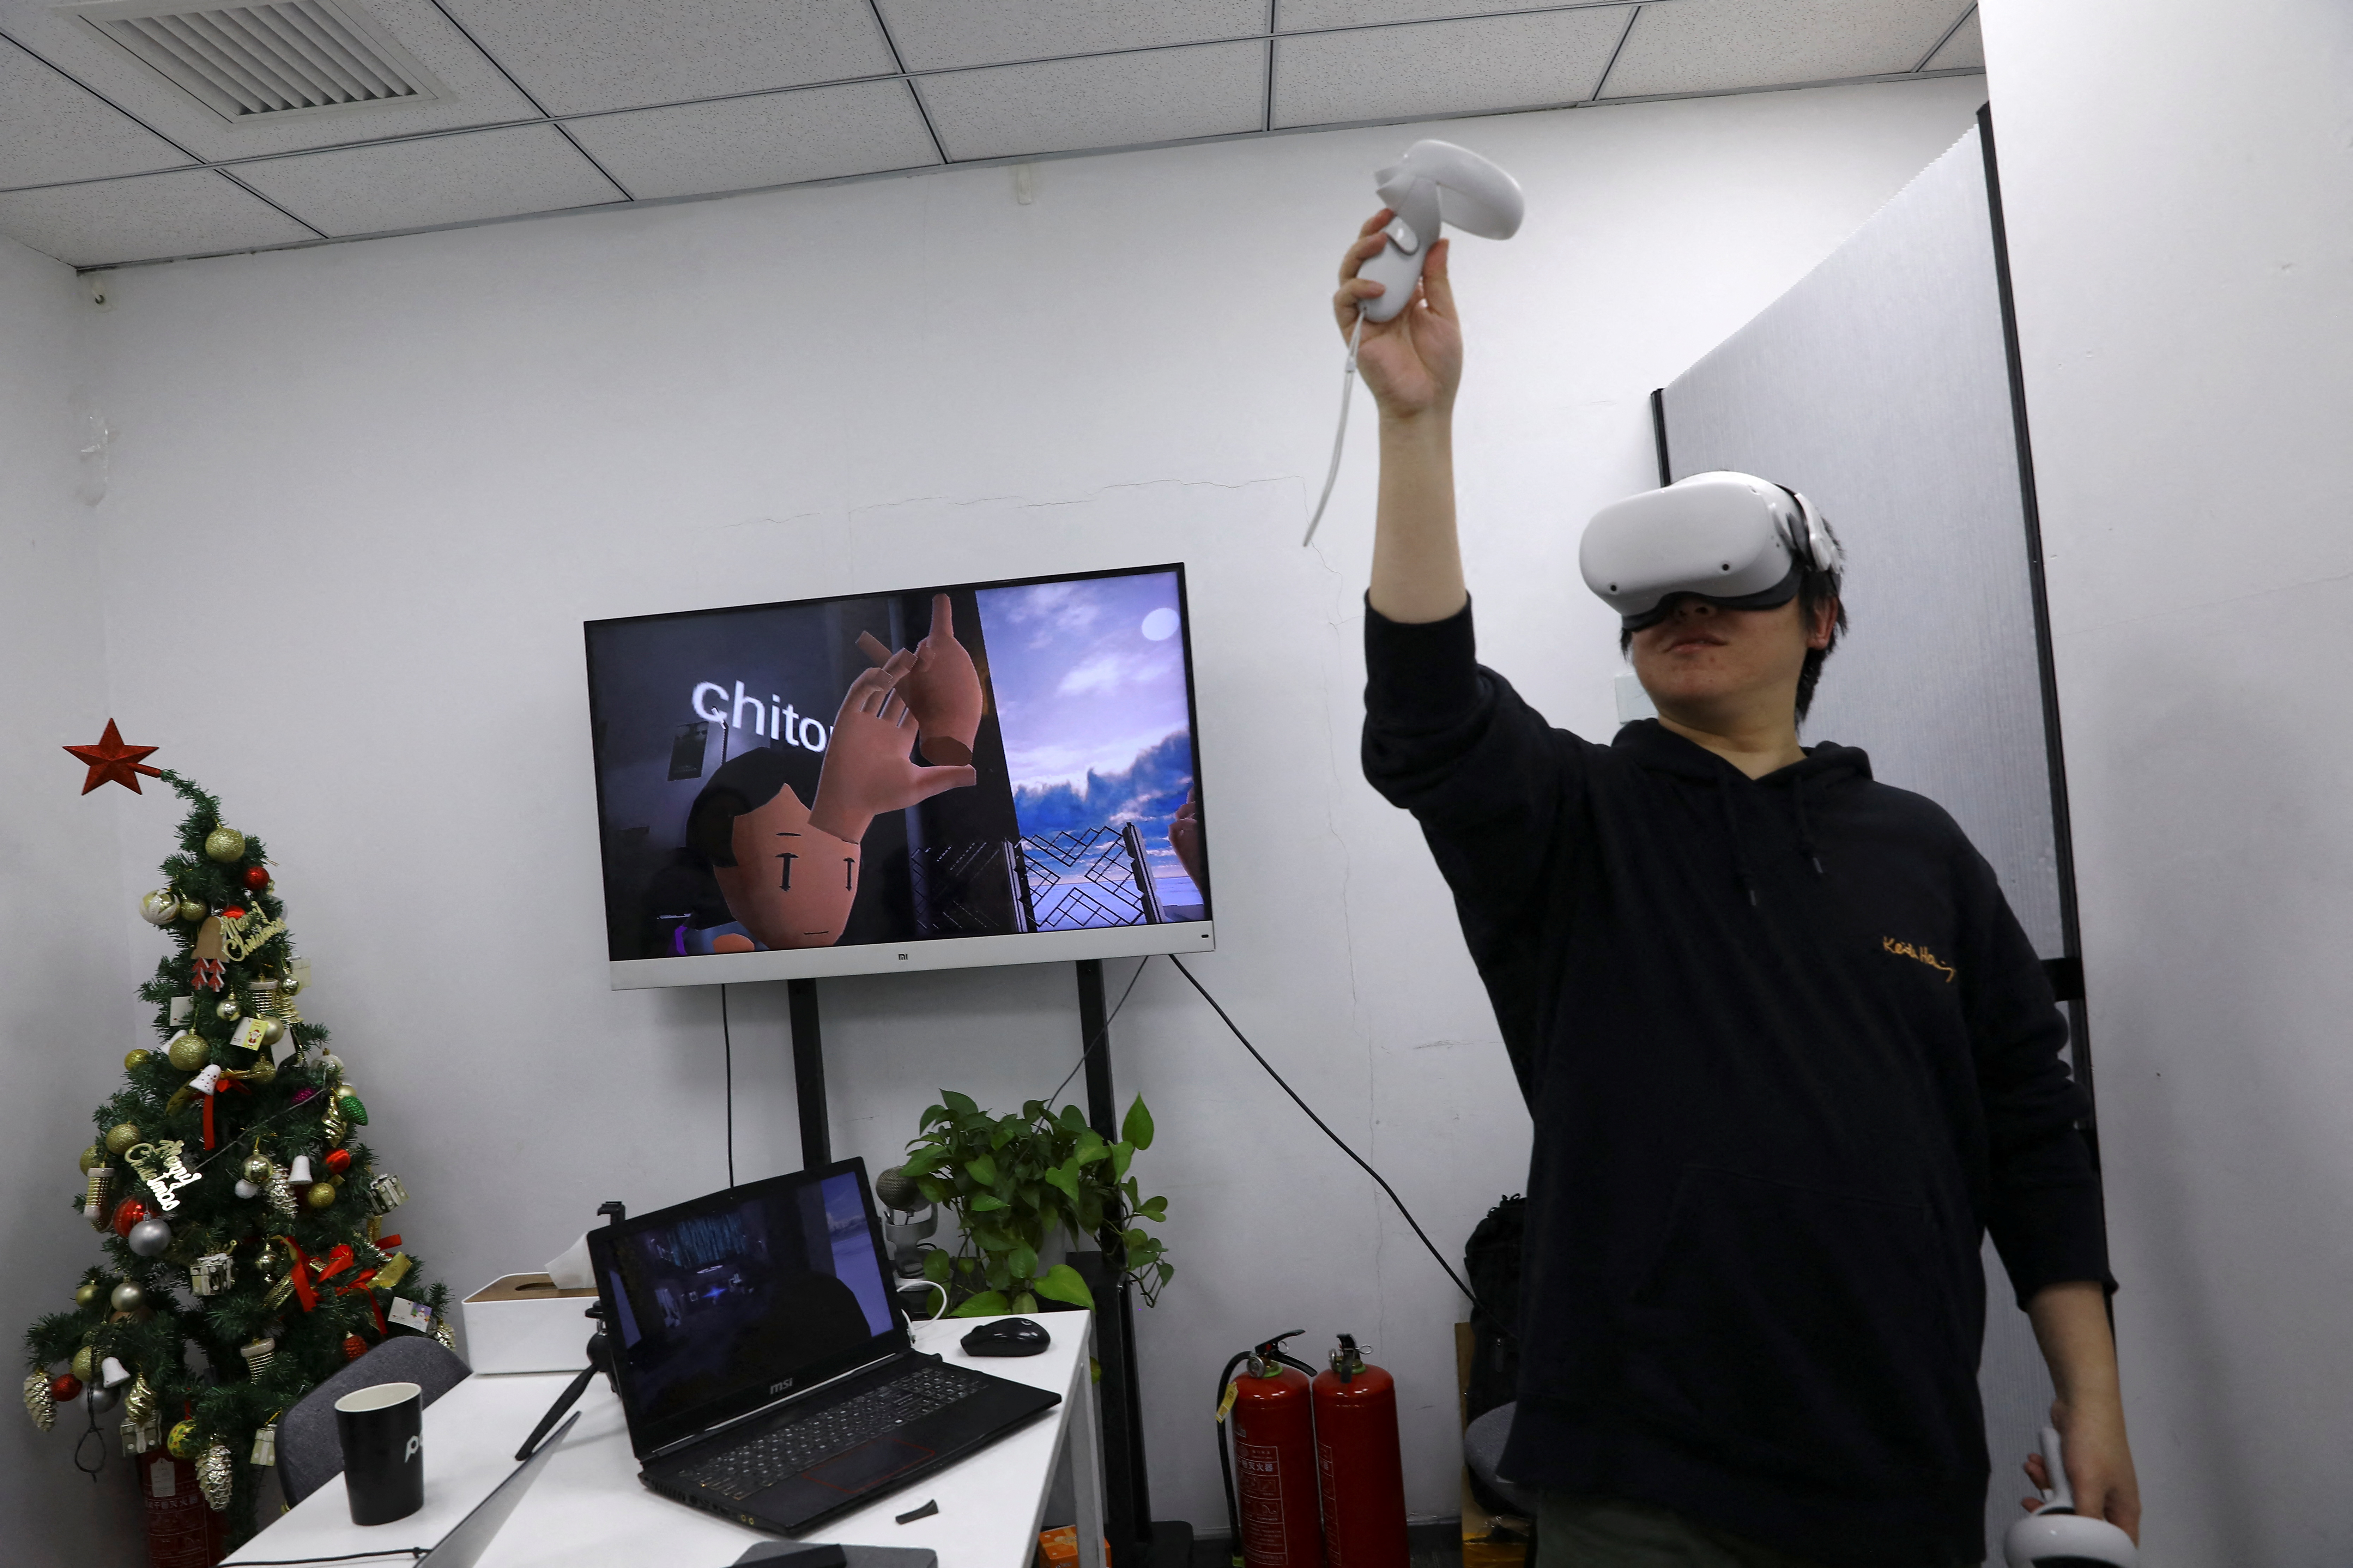 Pan Bohang, founder of vHome, a VR social gaming platform, wearing VR goggles greets with a user during a virtual gathering, at an office in Beijing